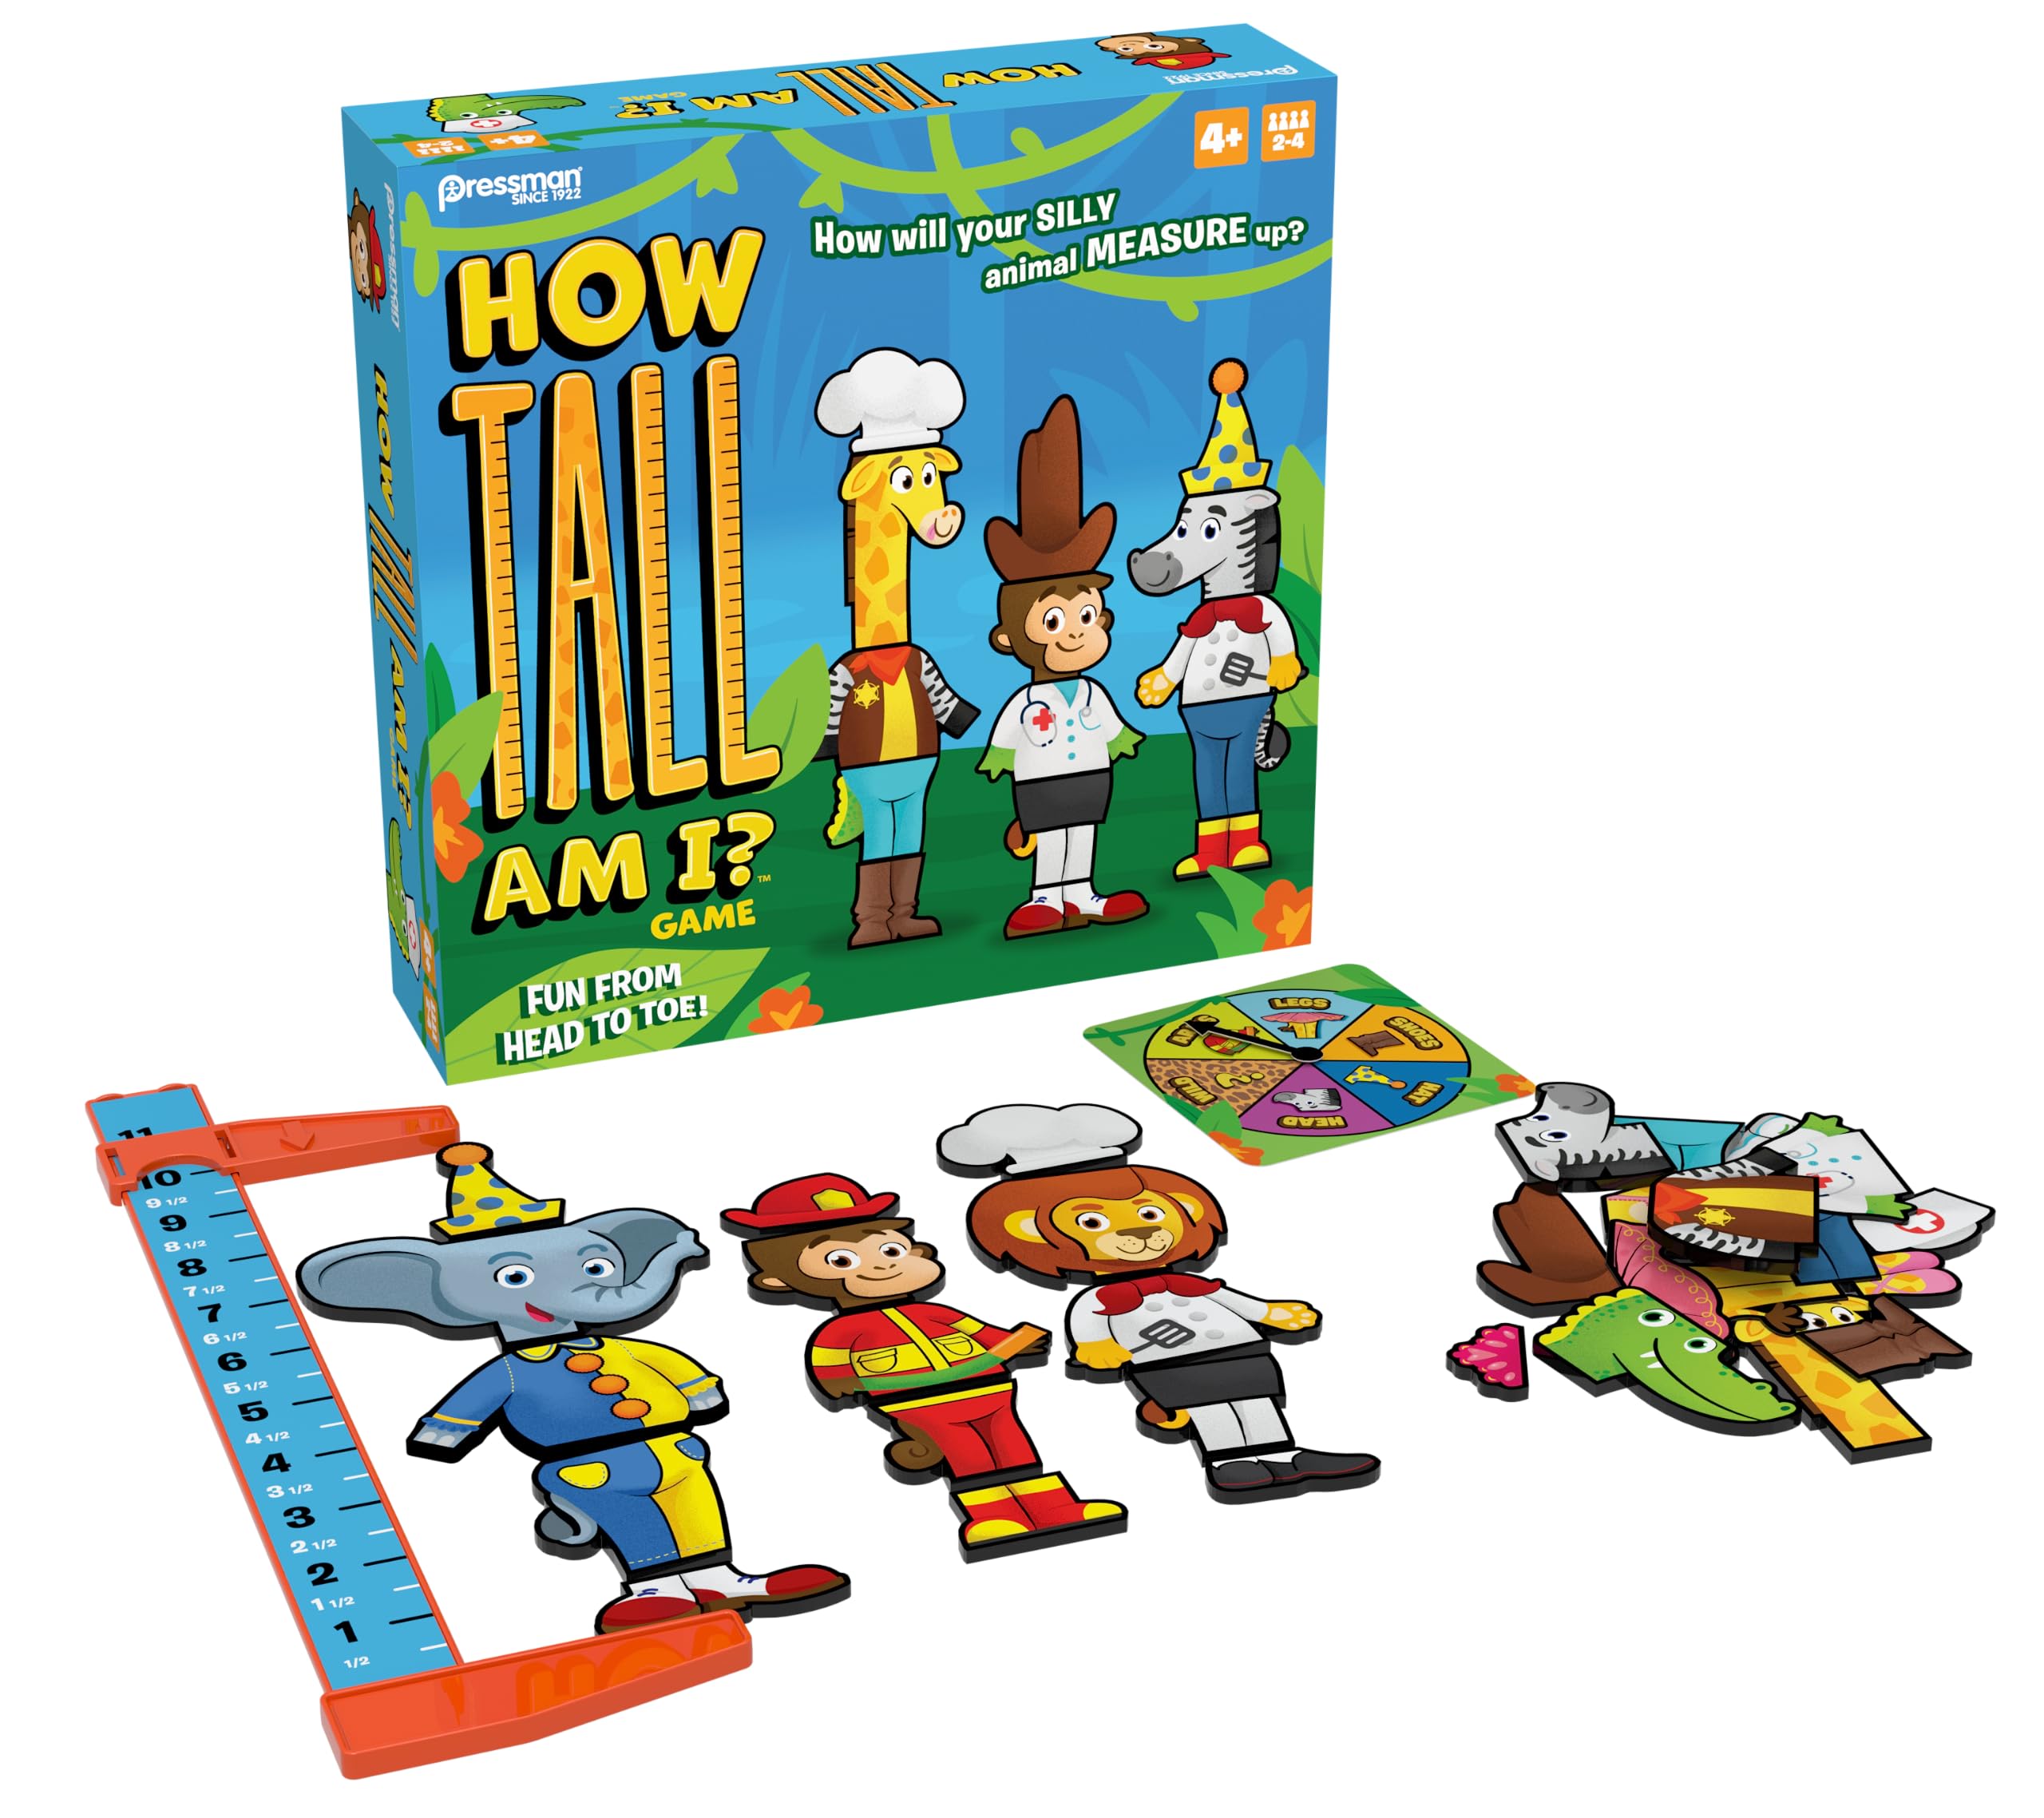 How Tall Am I? - Preschool Game of Measuring - Mix and Match to Create Your Animal, Tallest Wins! - Ages 4 and Up, 2-4 Players